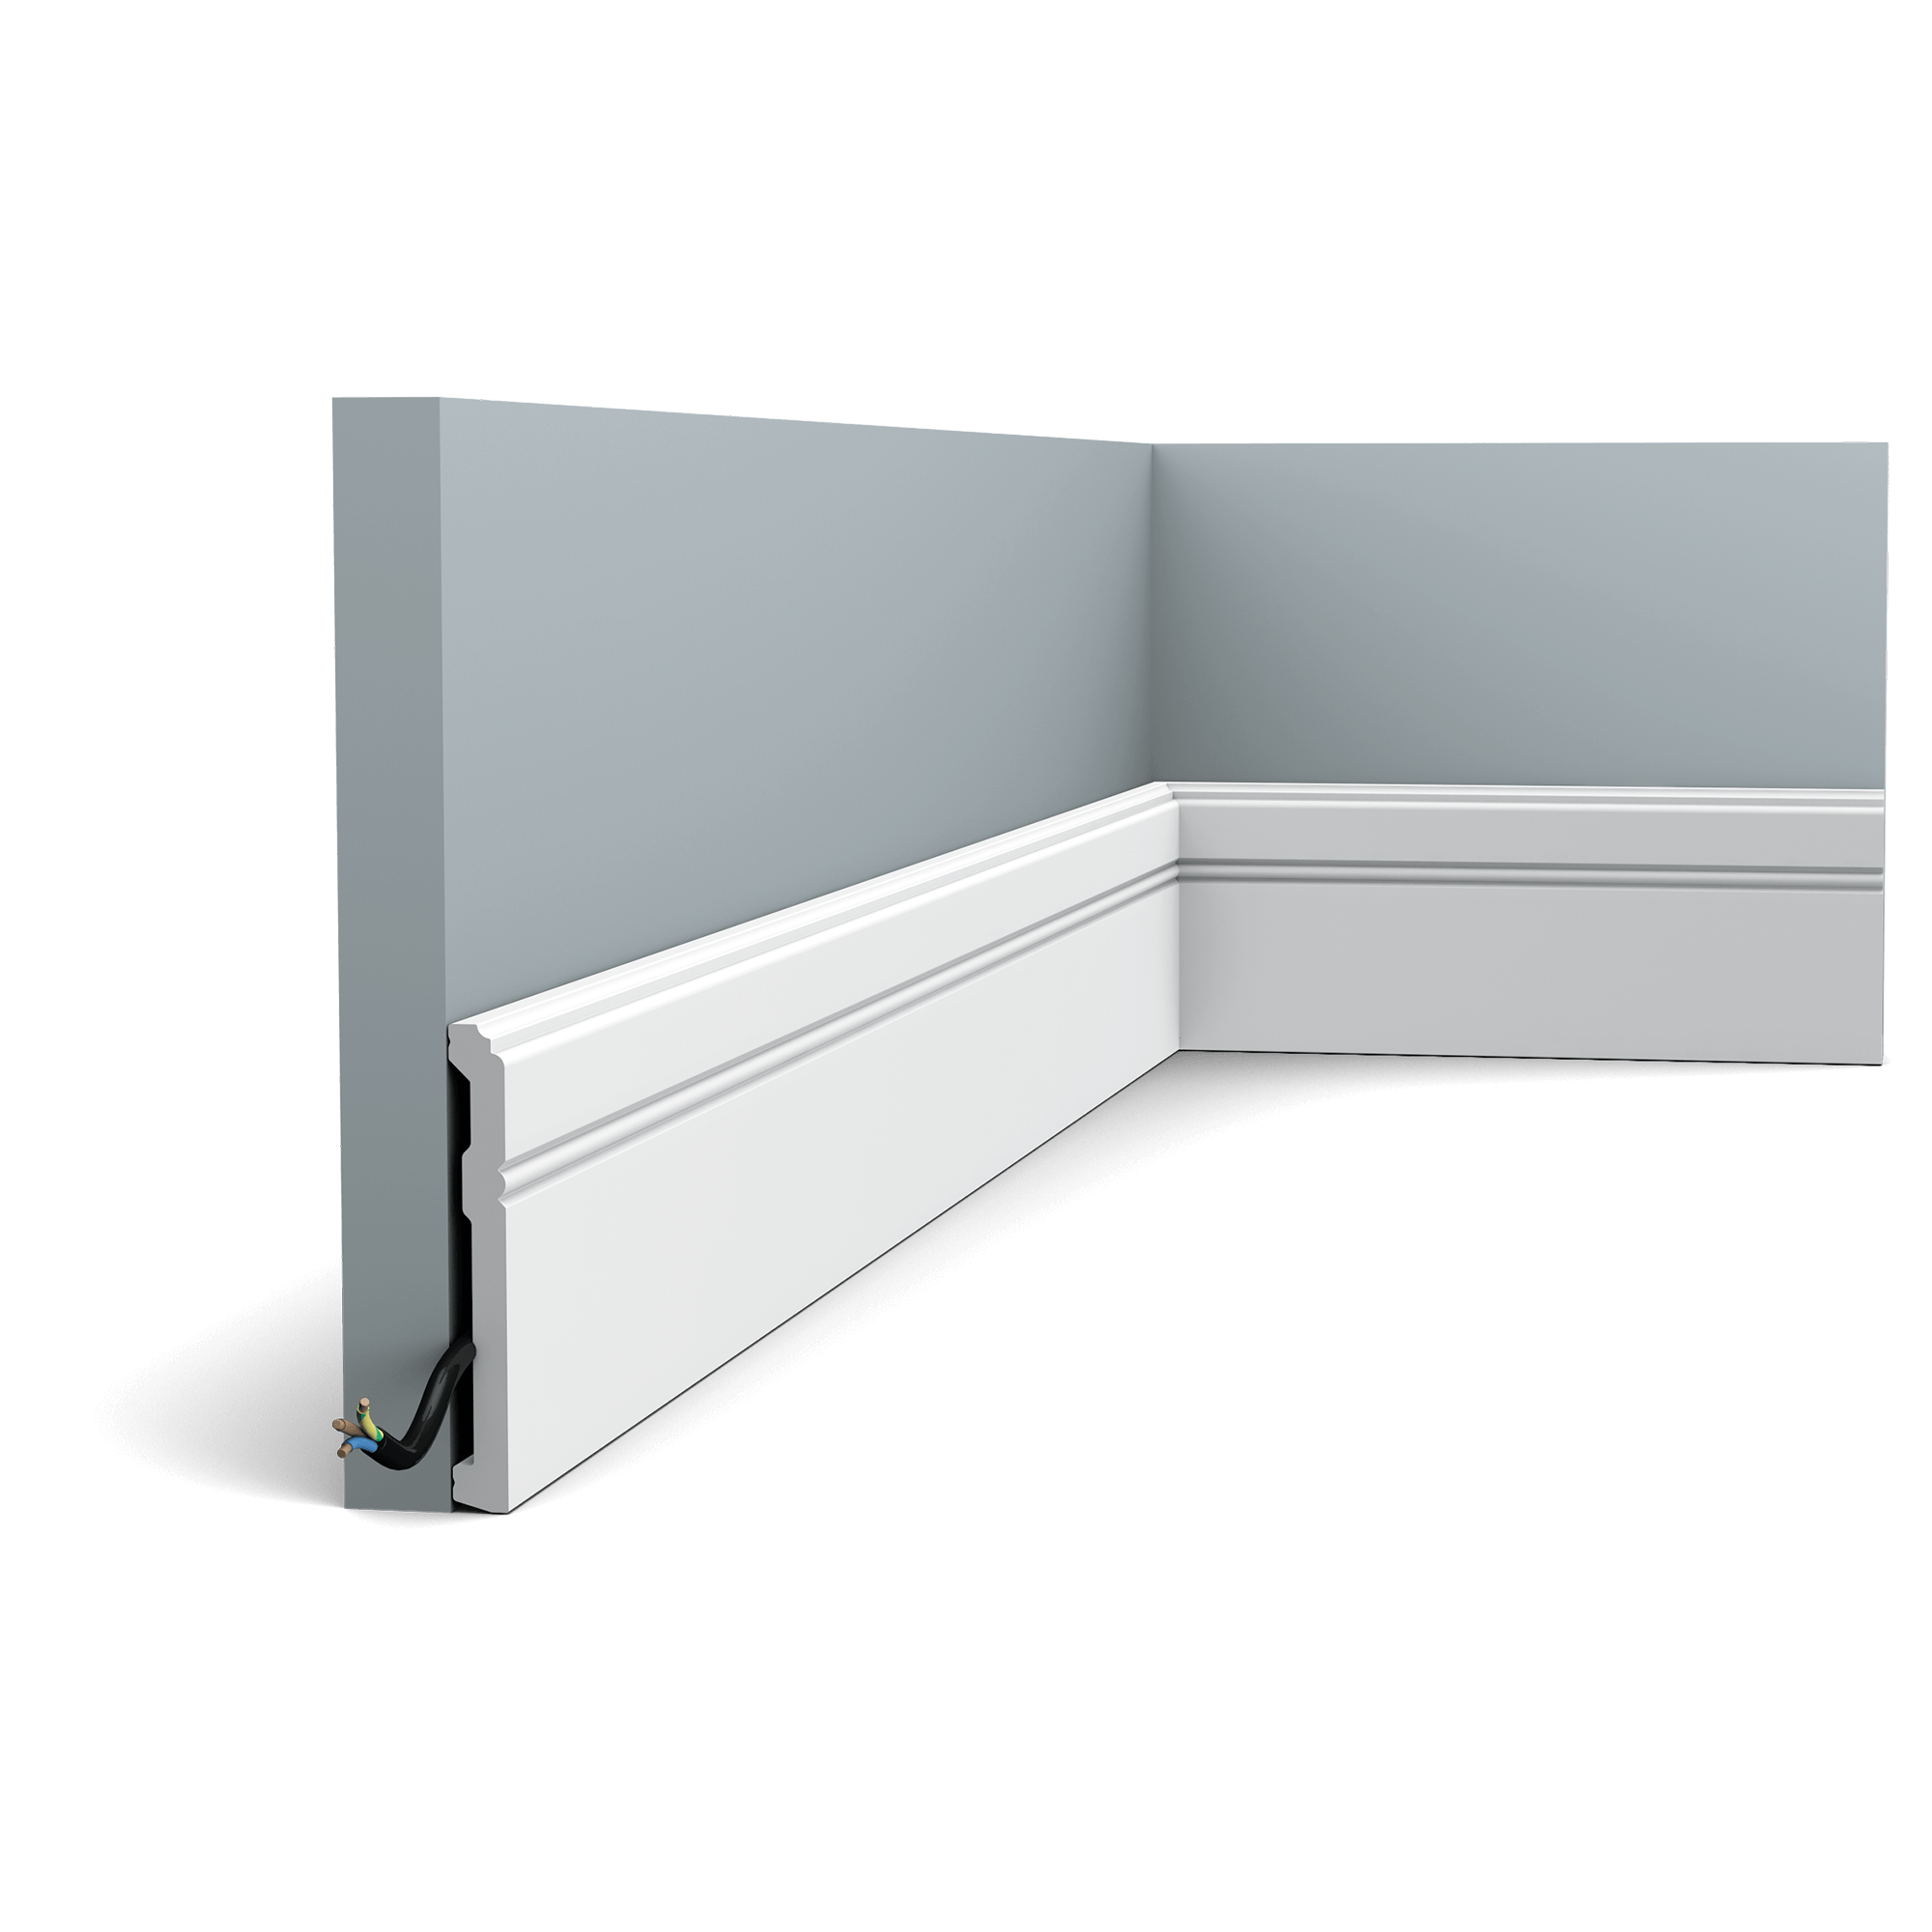 Contemporary skirting board with grooves. The restrained design creates an elegant transition between the floor and the wall.